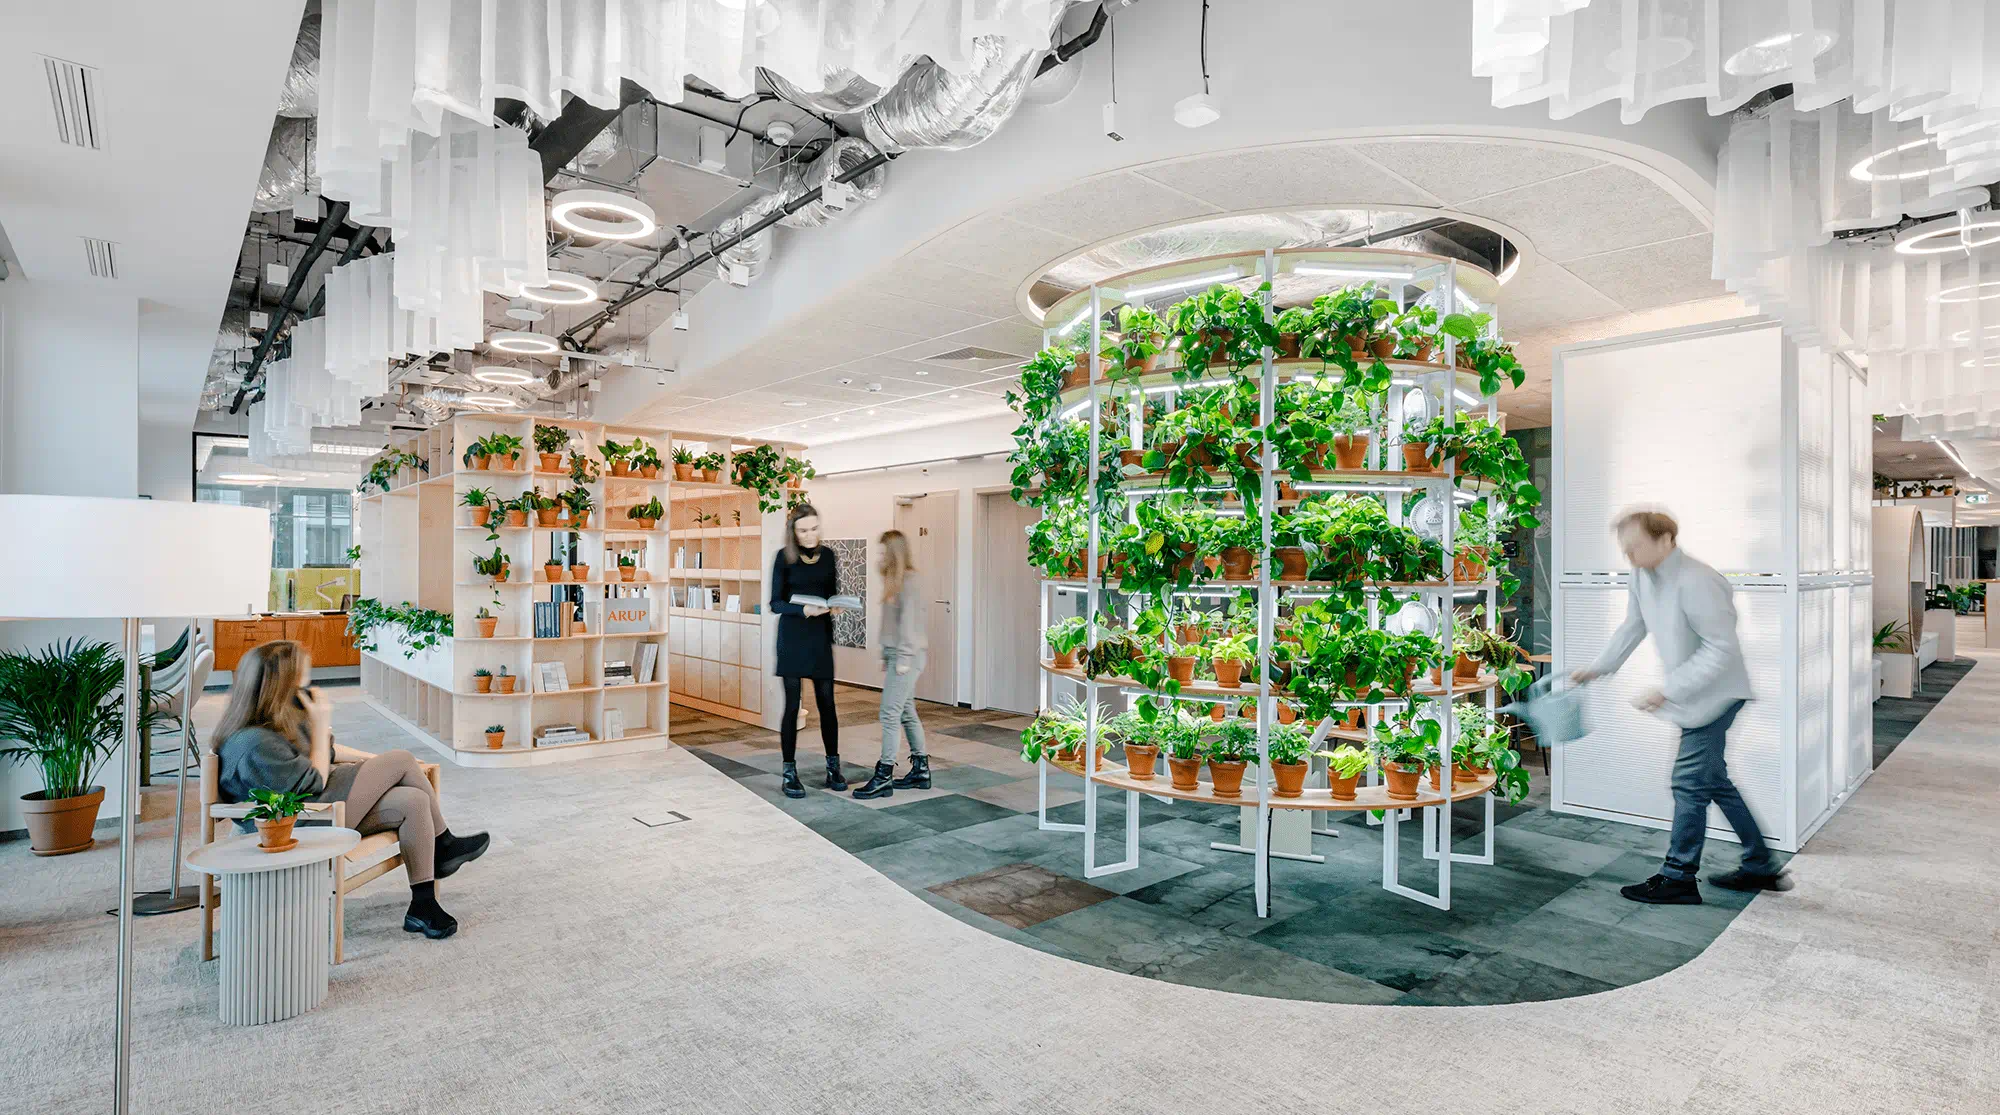 Two women and a man sitting in an office space, and there is a circule structure like a shelf with plants on